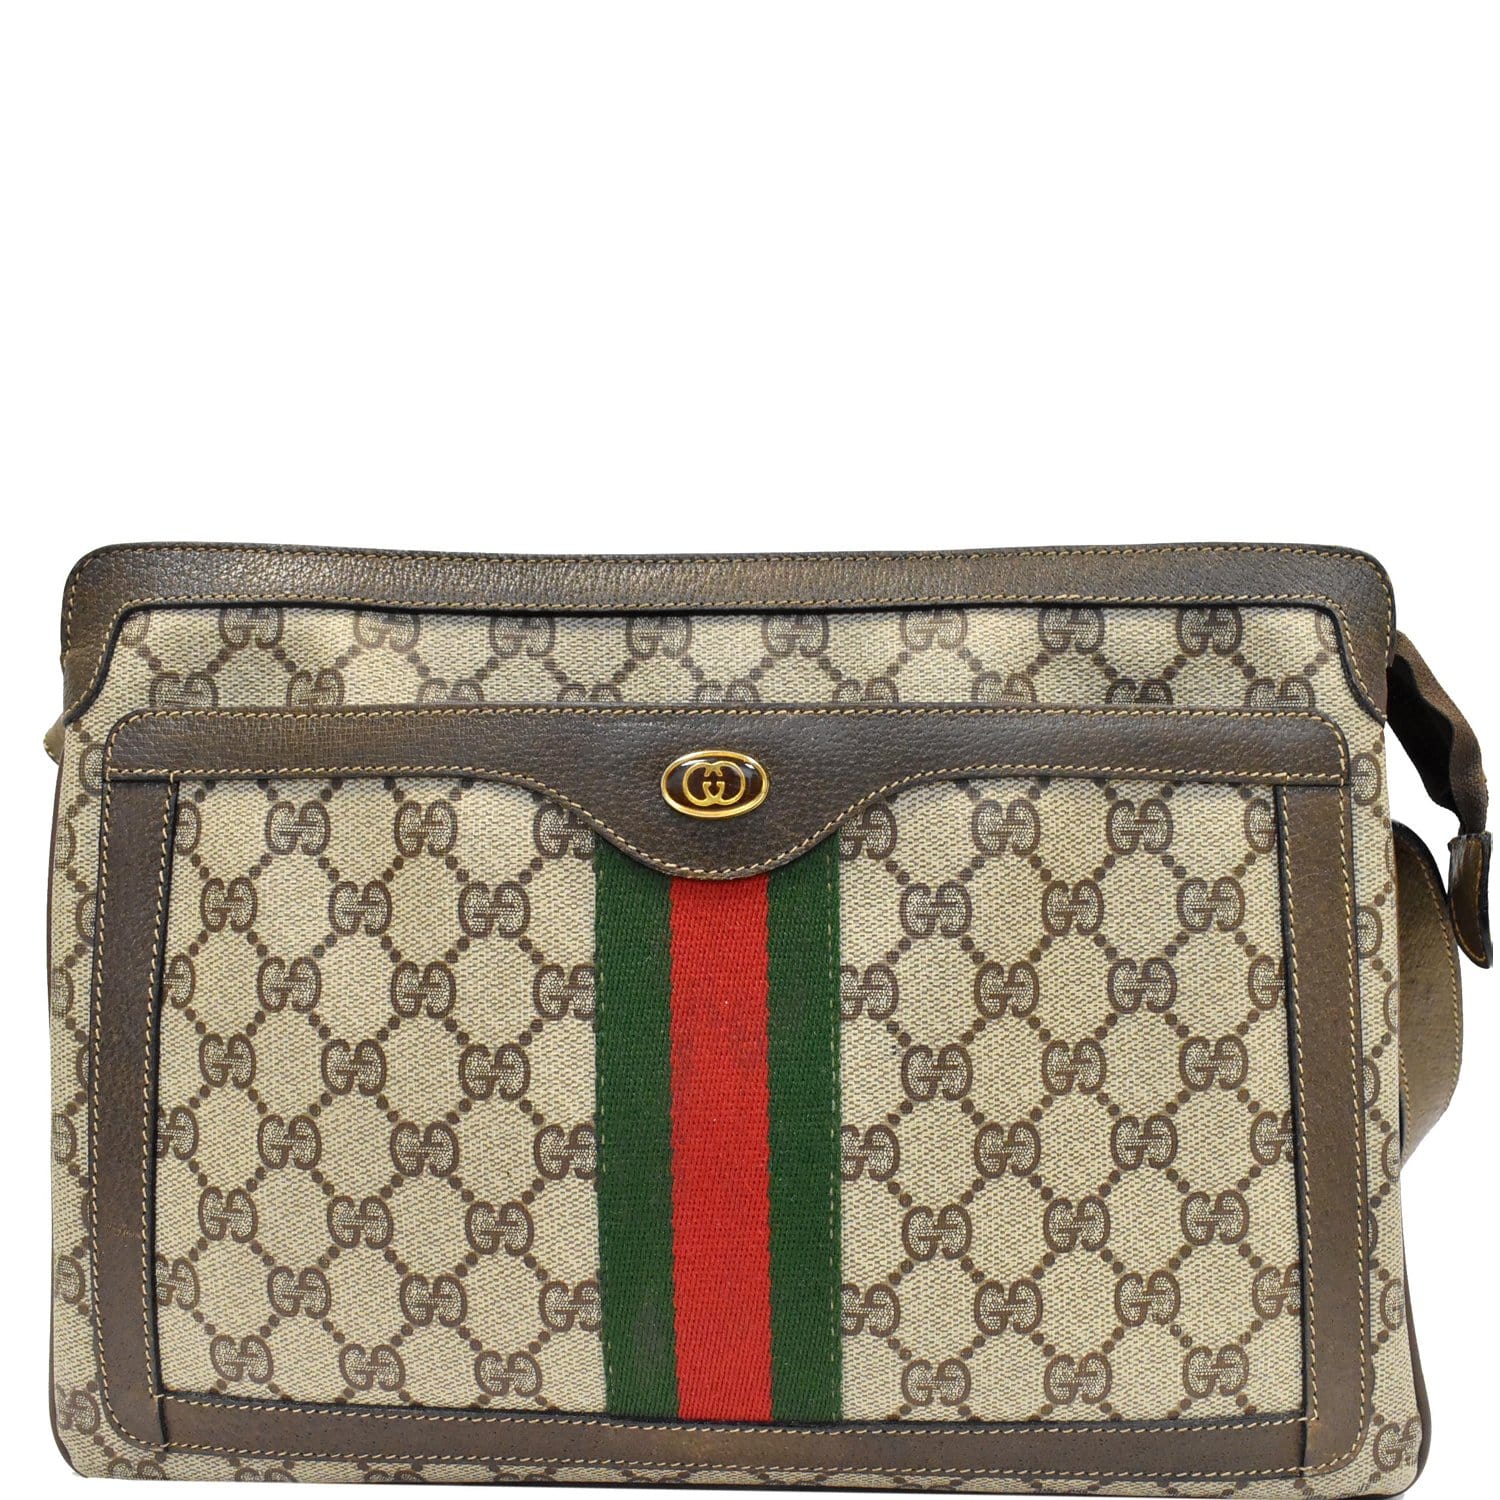 GUCCI VINTAGE GG LOGO COATED CANVAS & BROWN LEATHER CROSSBODY BAG